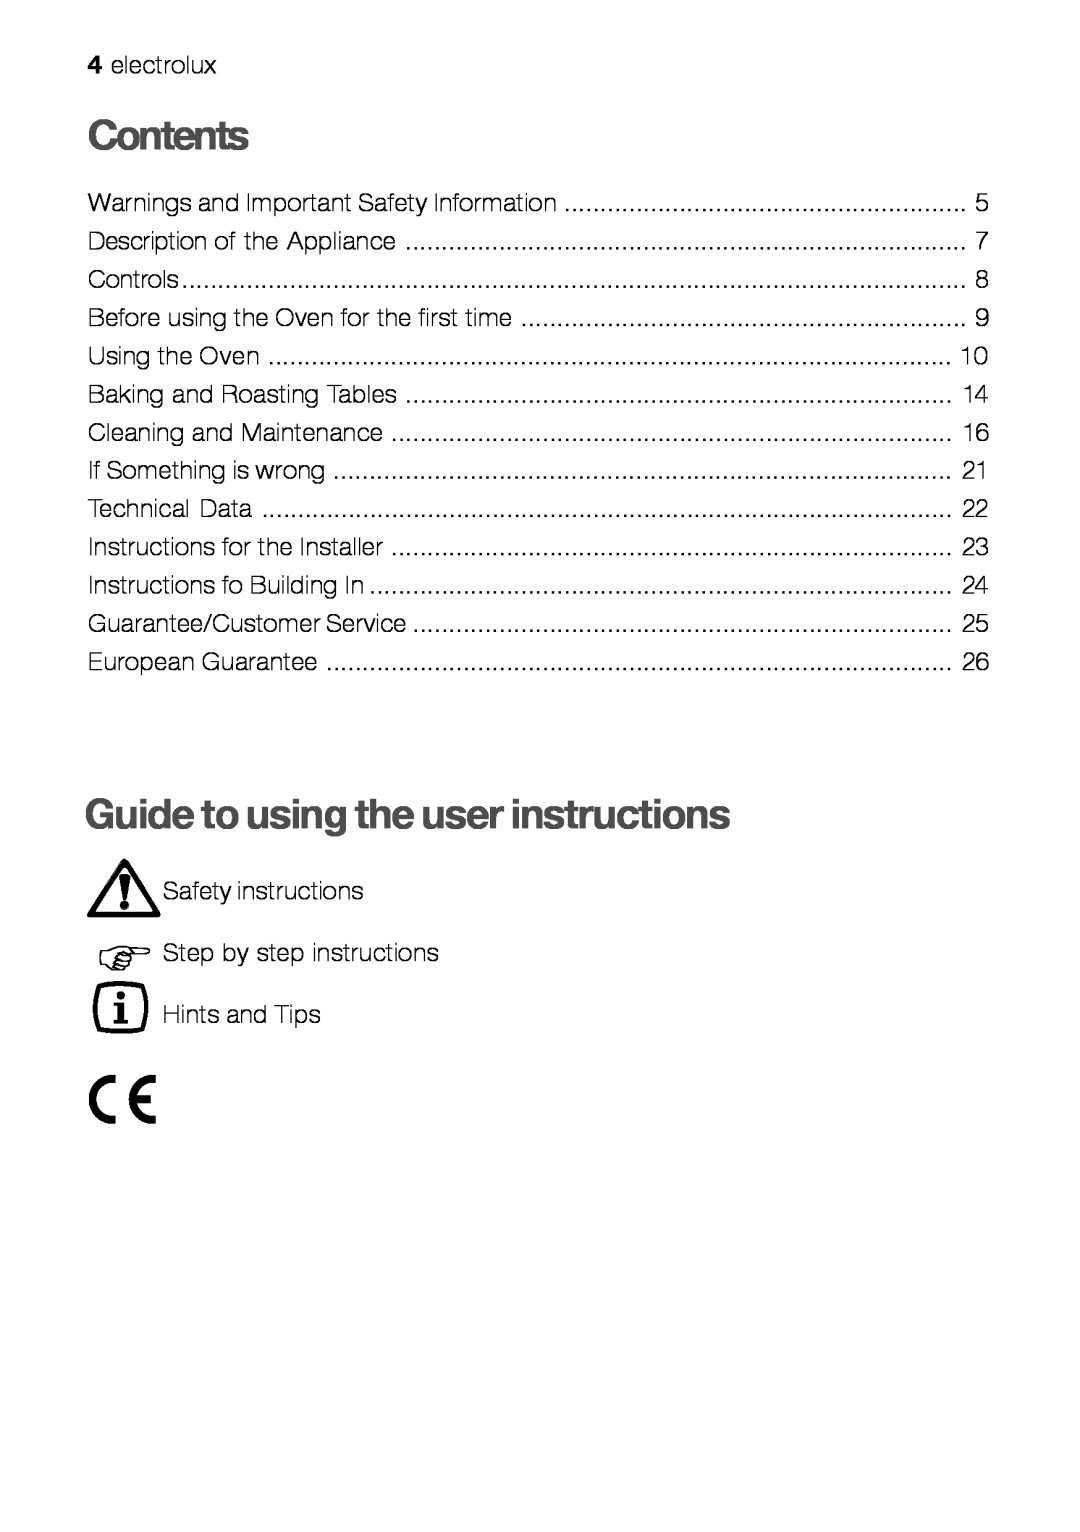 Electrolux EOB 21001 Contents, Guide to using the user instructions, Controls, Using the Oven, If Something is wrong 